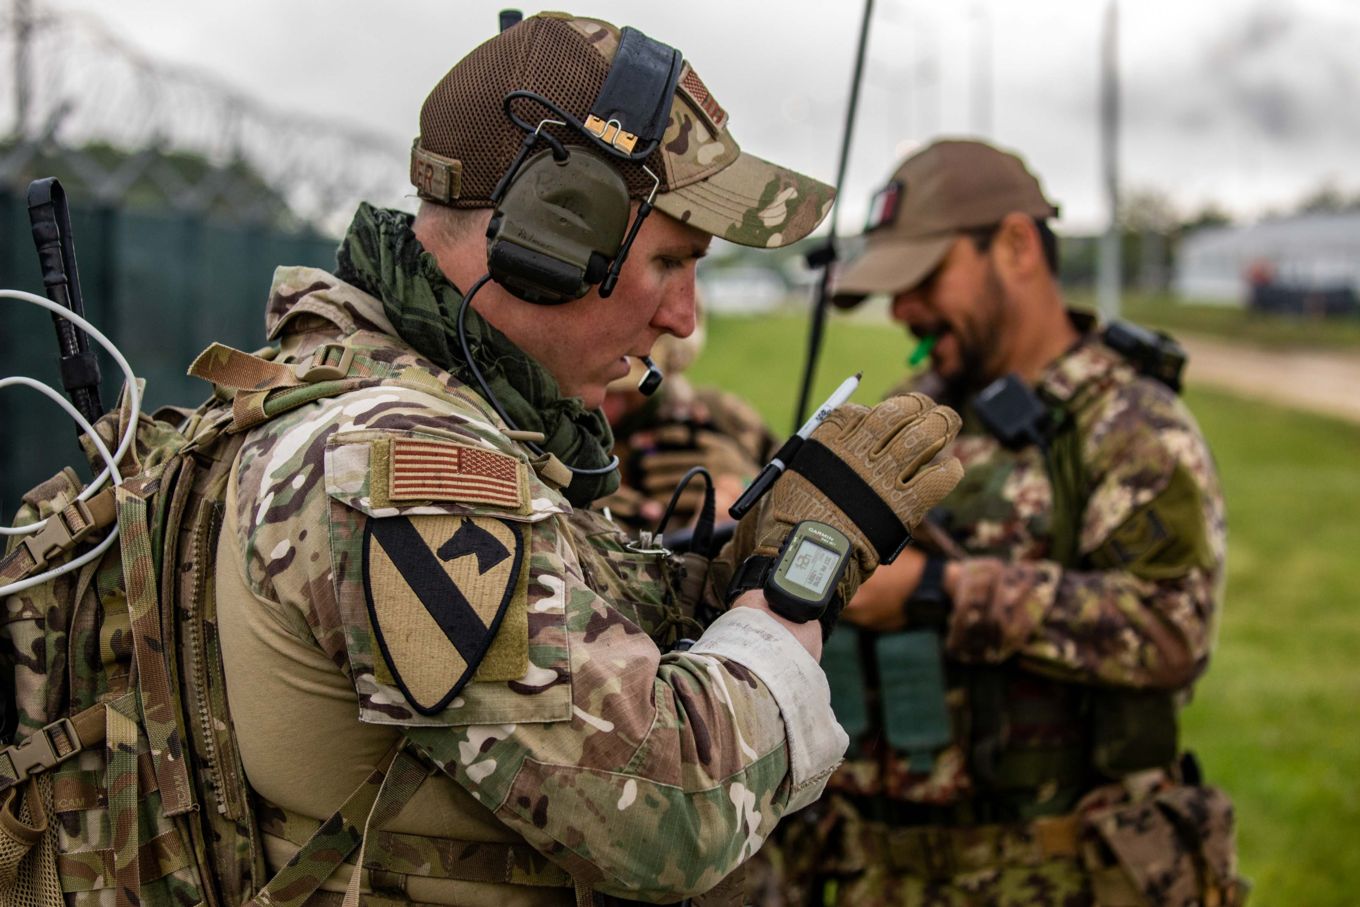 JTAC using radio while two others work in the background. .